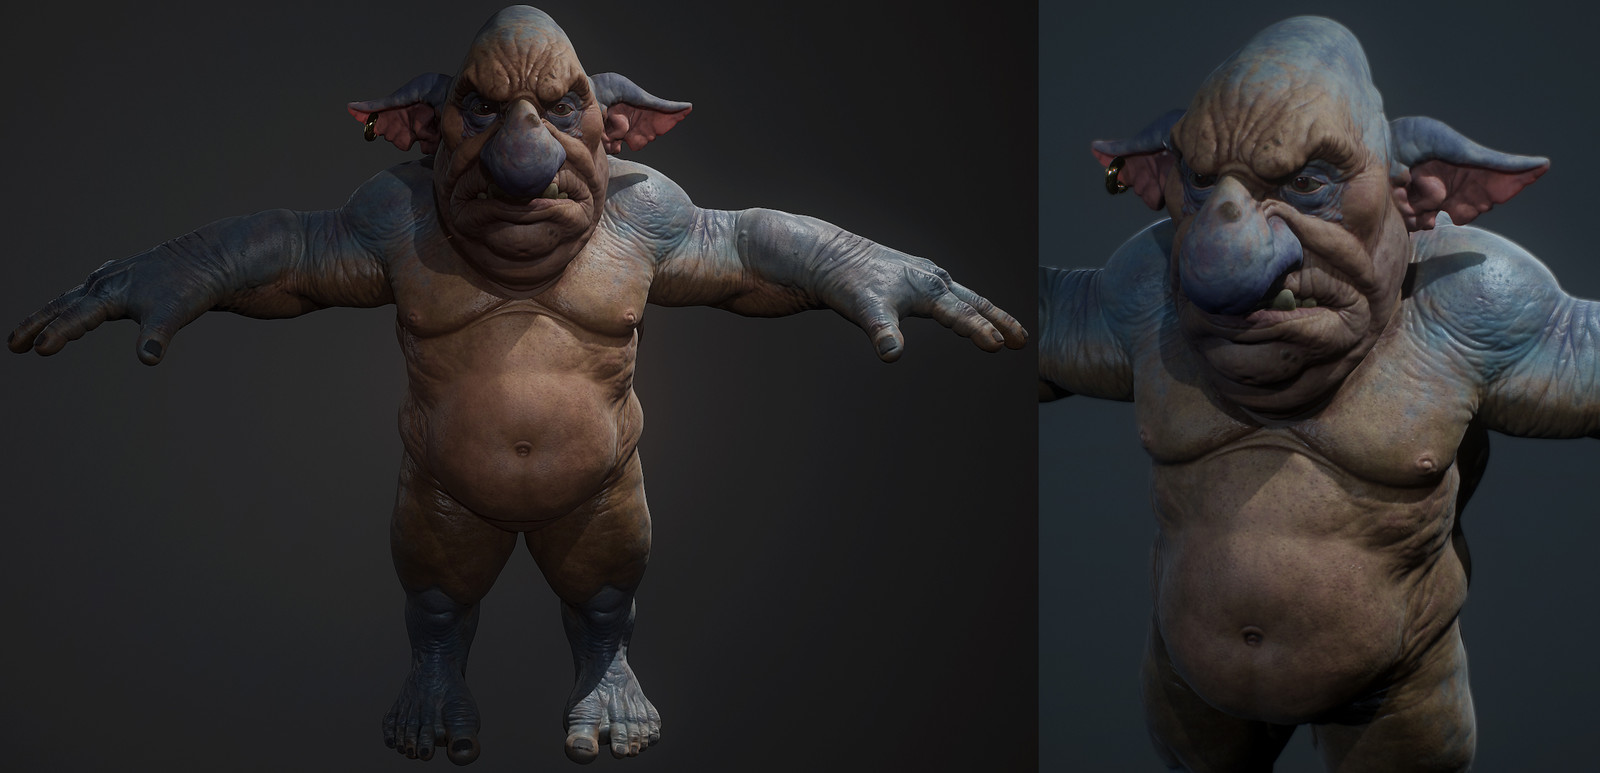 Full body texturing in Substance and Marmoset Toolbag 3.